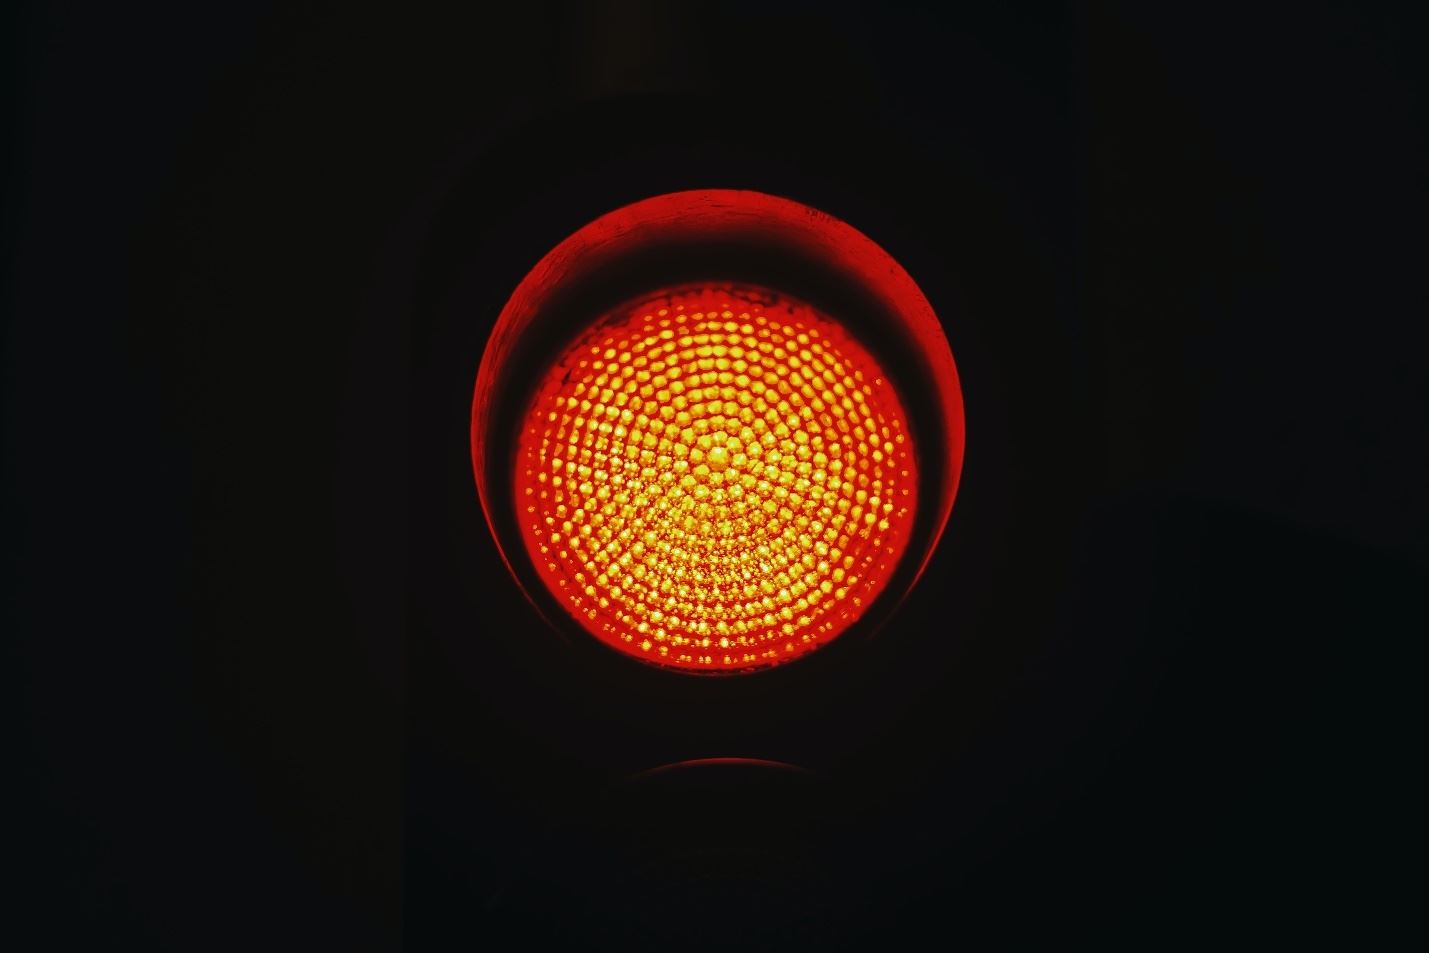 A close-up of a red light

Description automatically generated with medium confidence